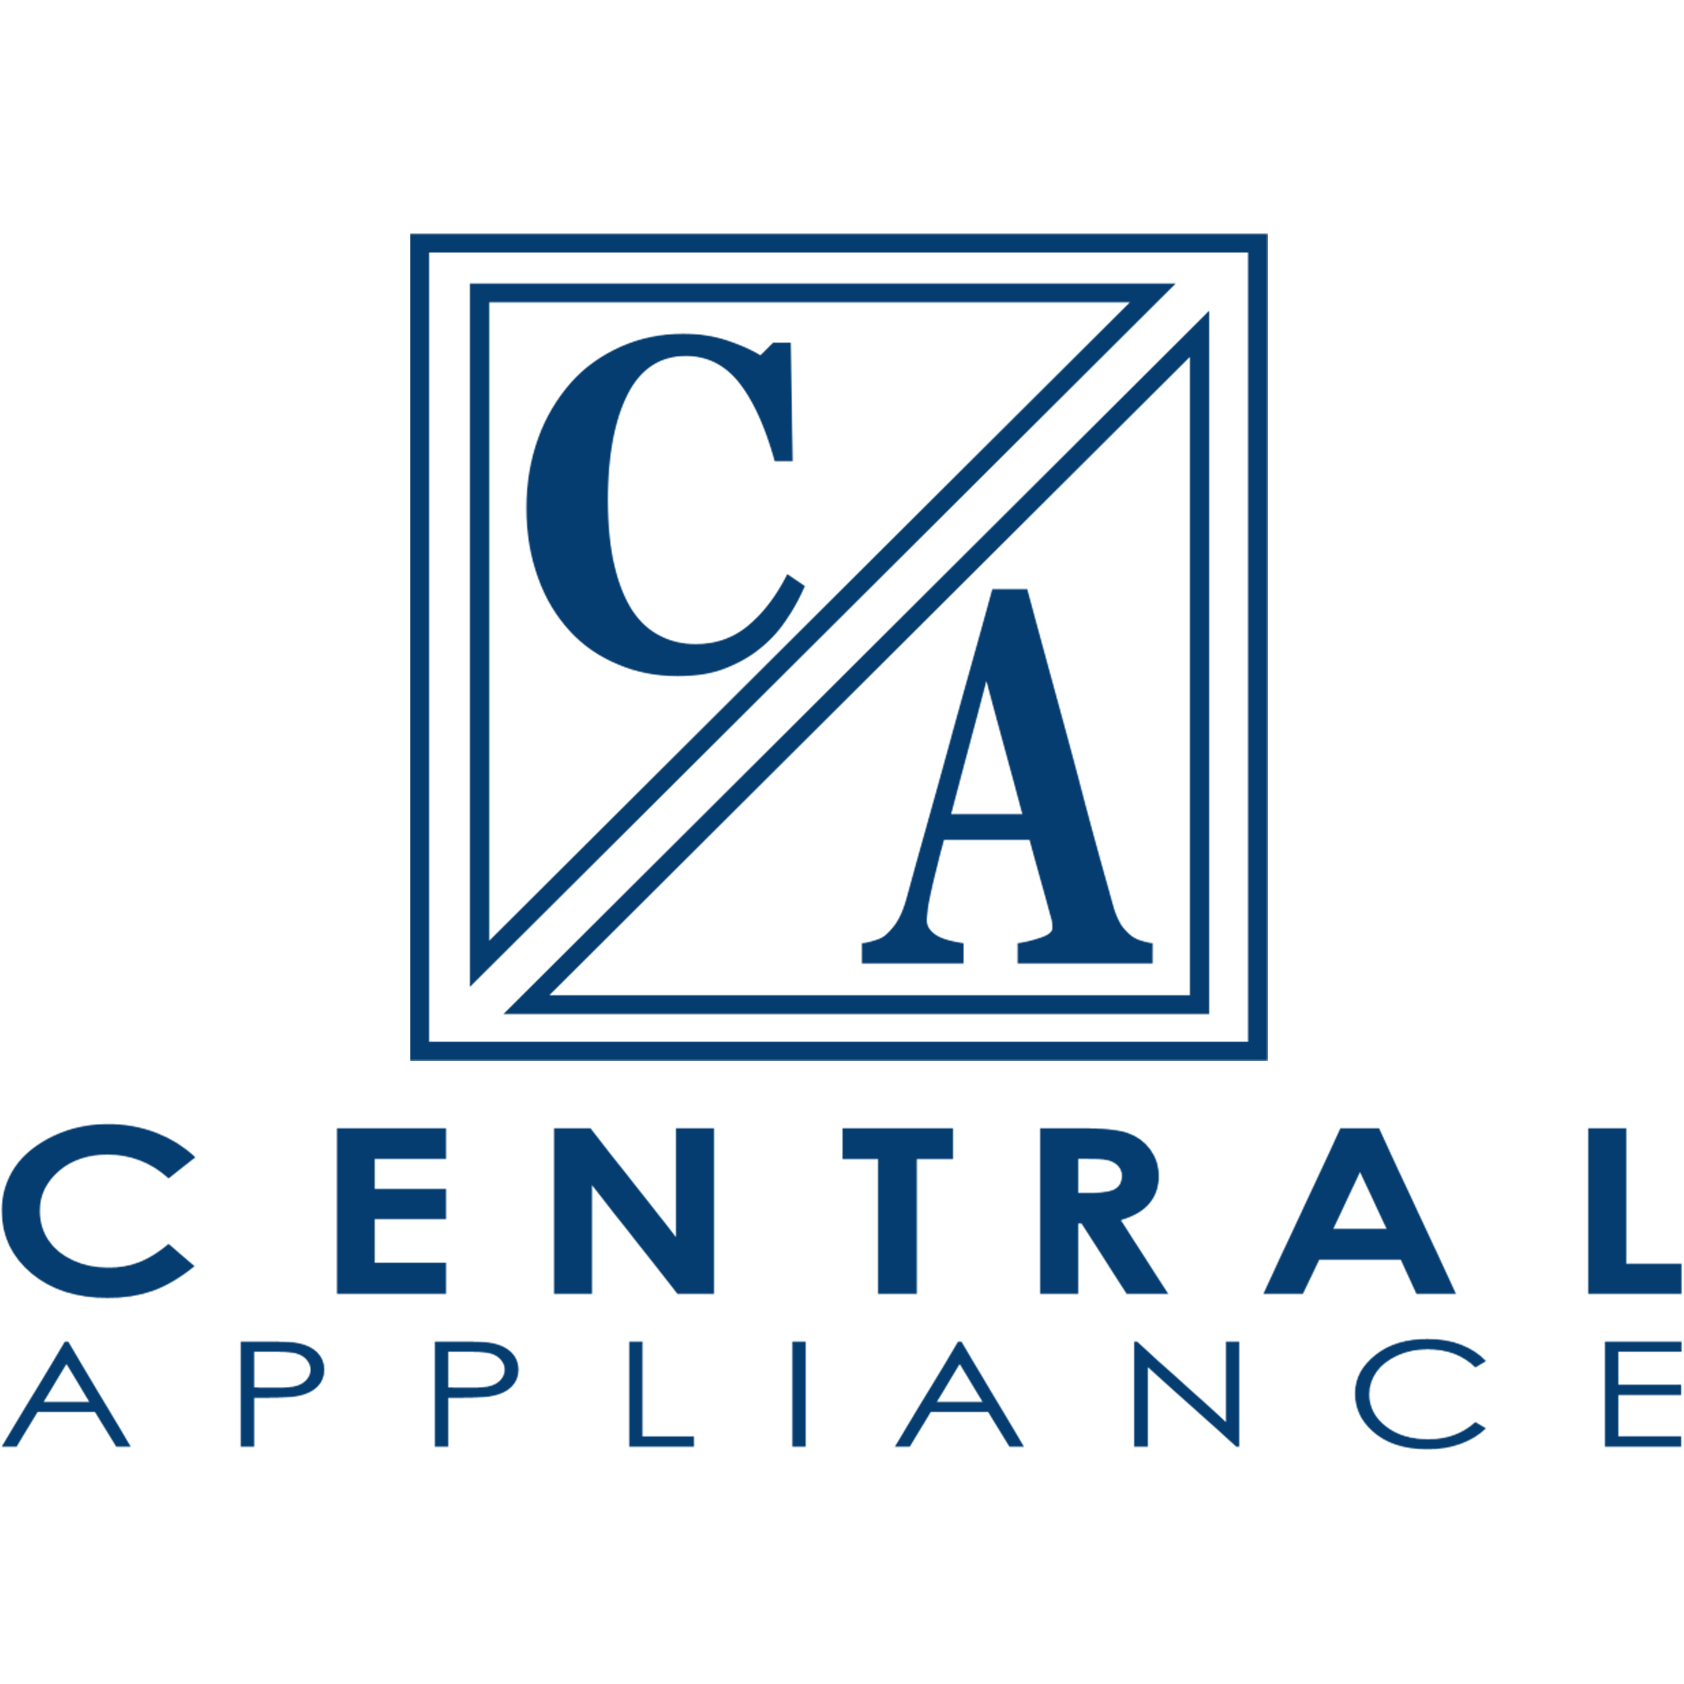 Central Appliance Co. Inc